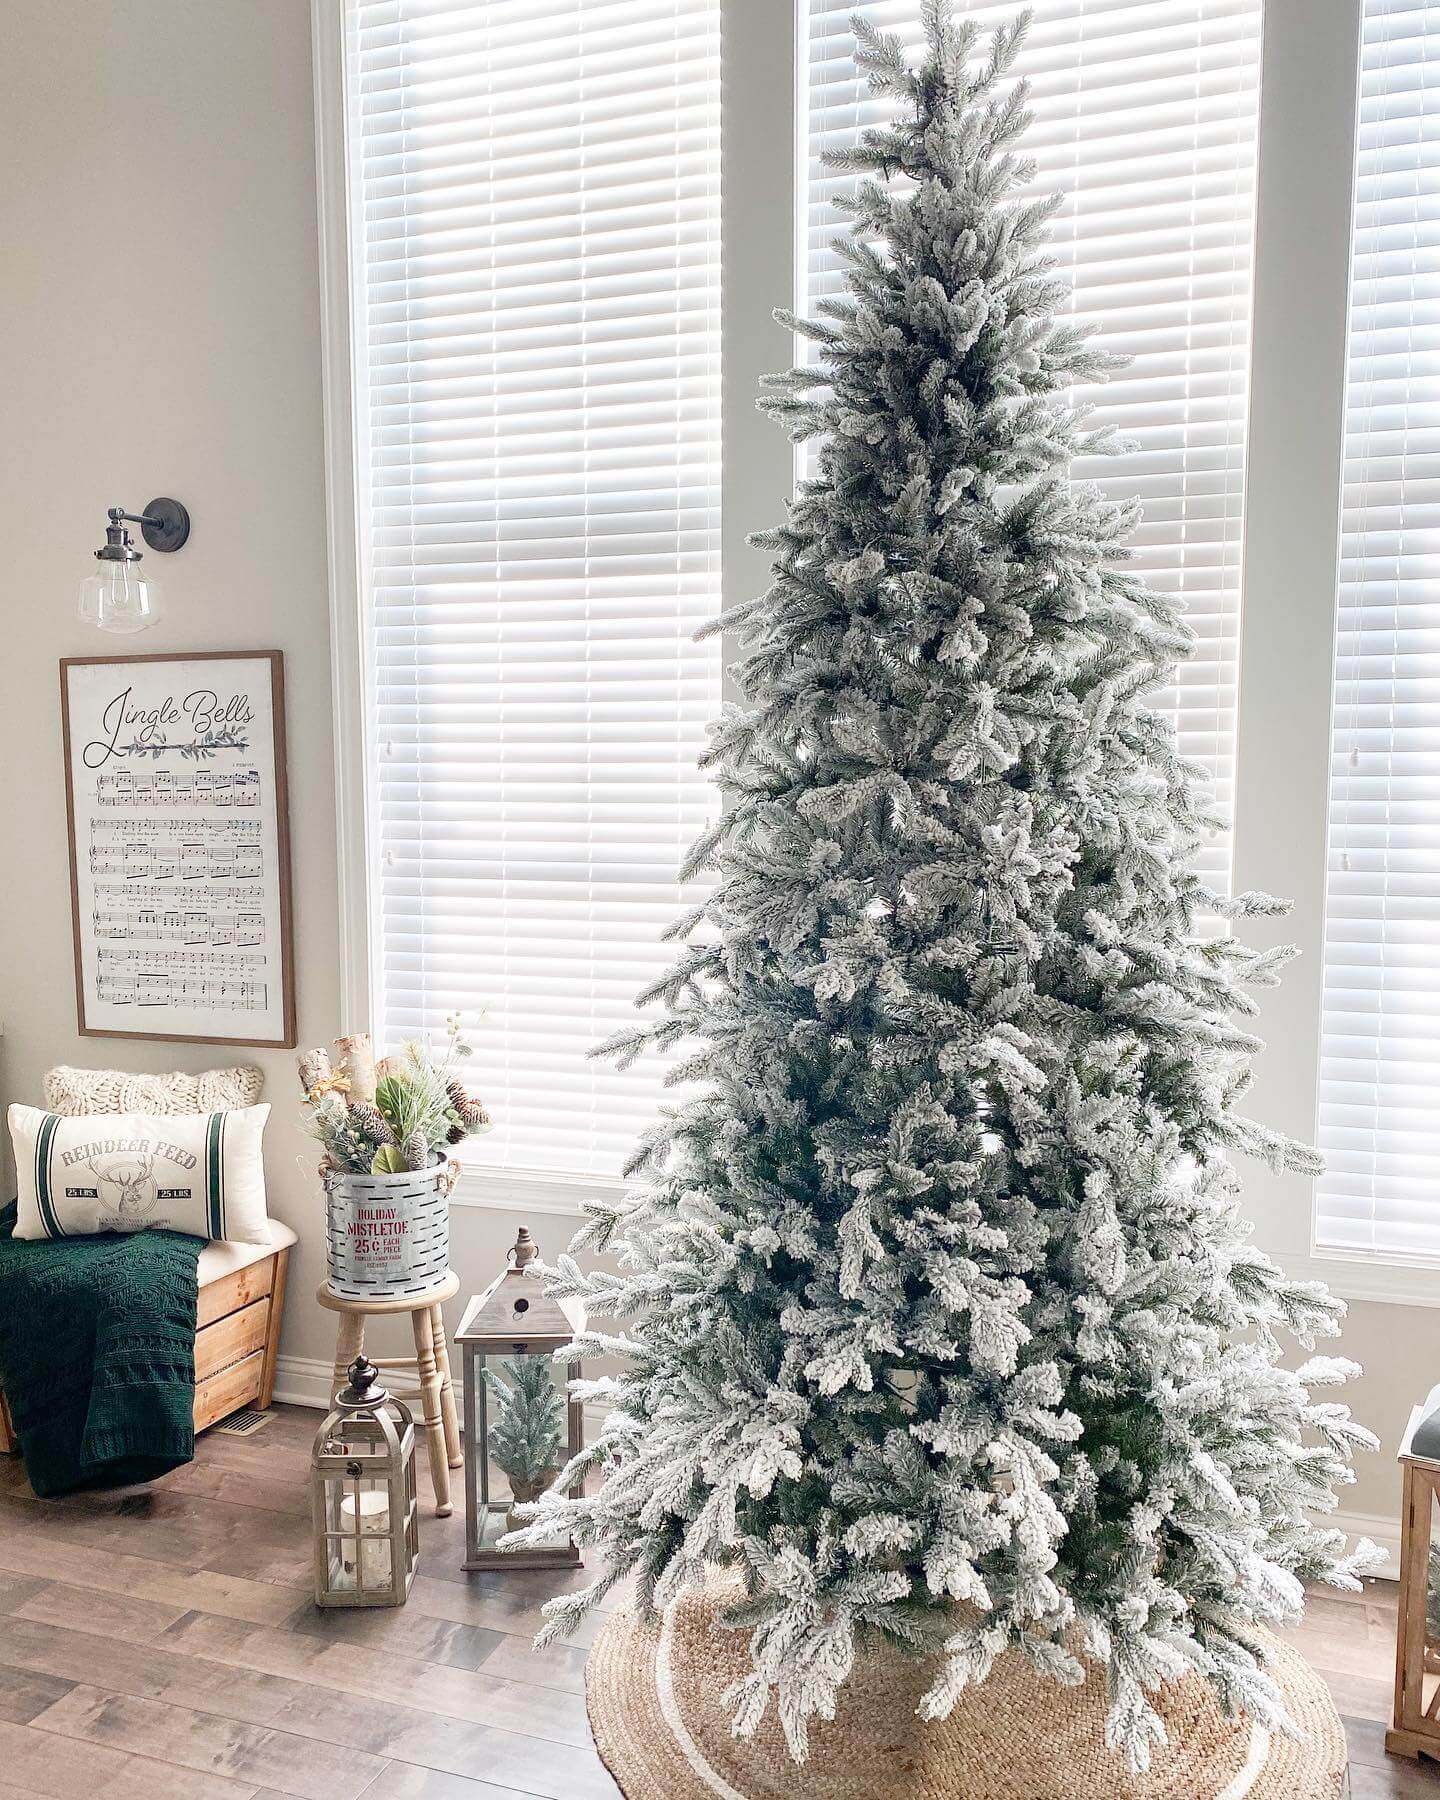 King of Christmas 7.5' Queen Flock® Slim Artificial Christmas Tree With 650 Warm White LED Lights